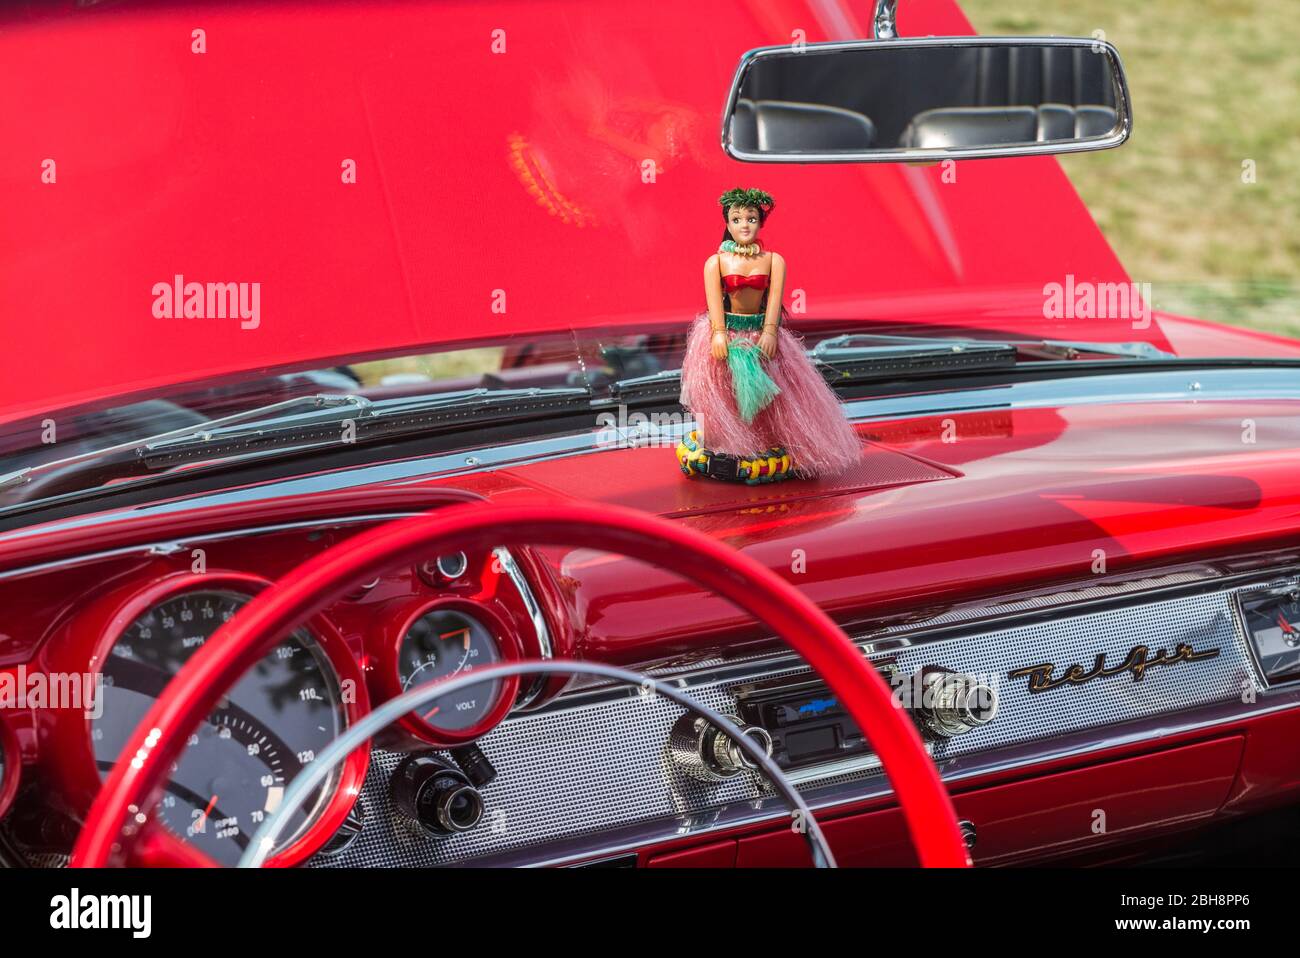 USA, New England, Massachusetts, Cape Ann, Gloucester, antique car, antique car with kewpie doll on the dashboard Stock Photo